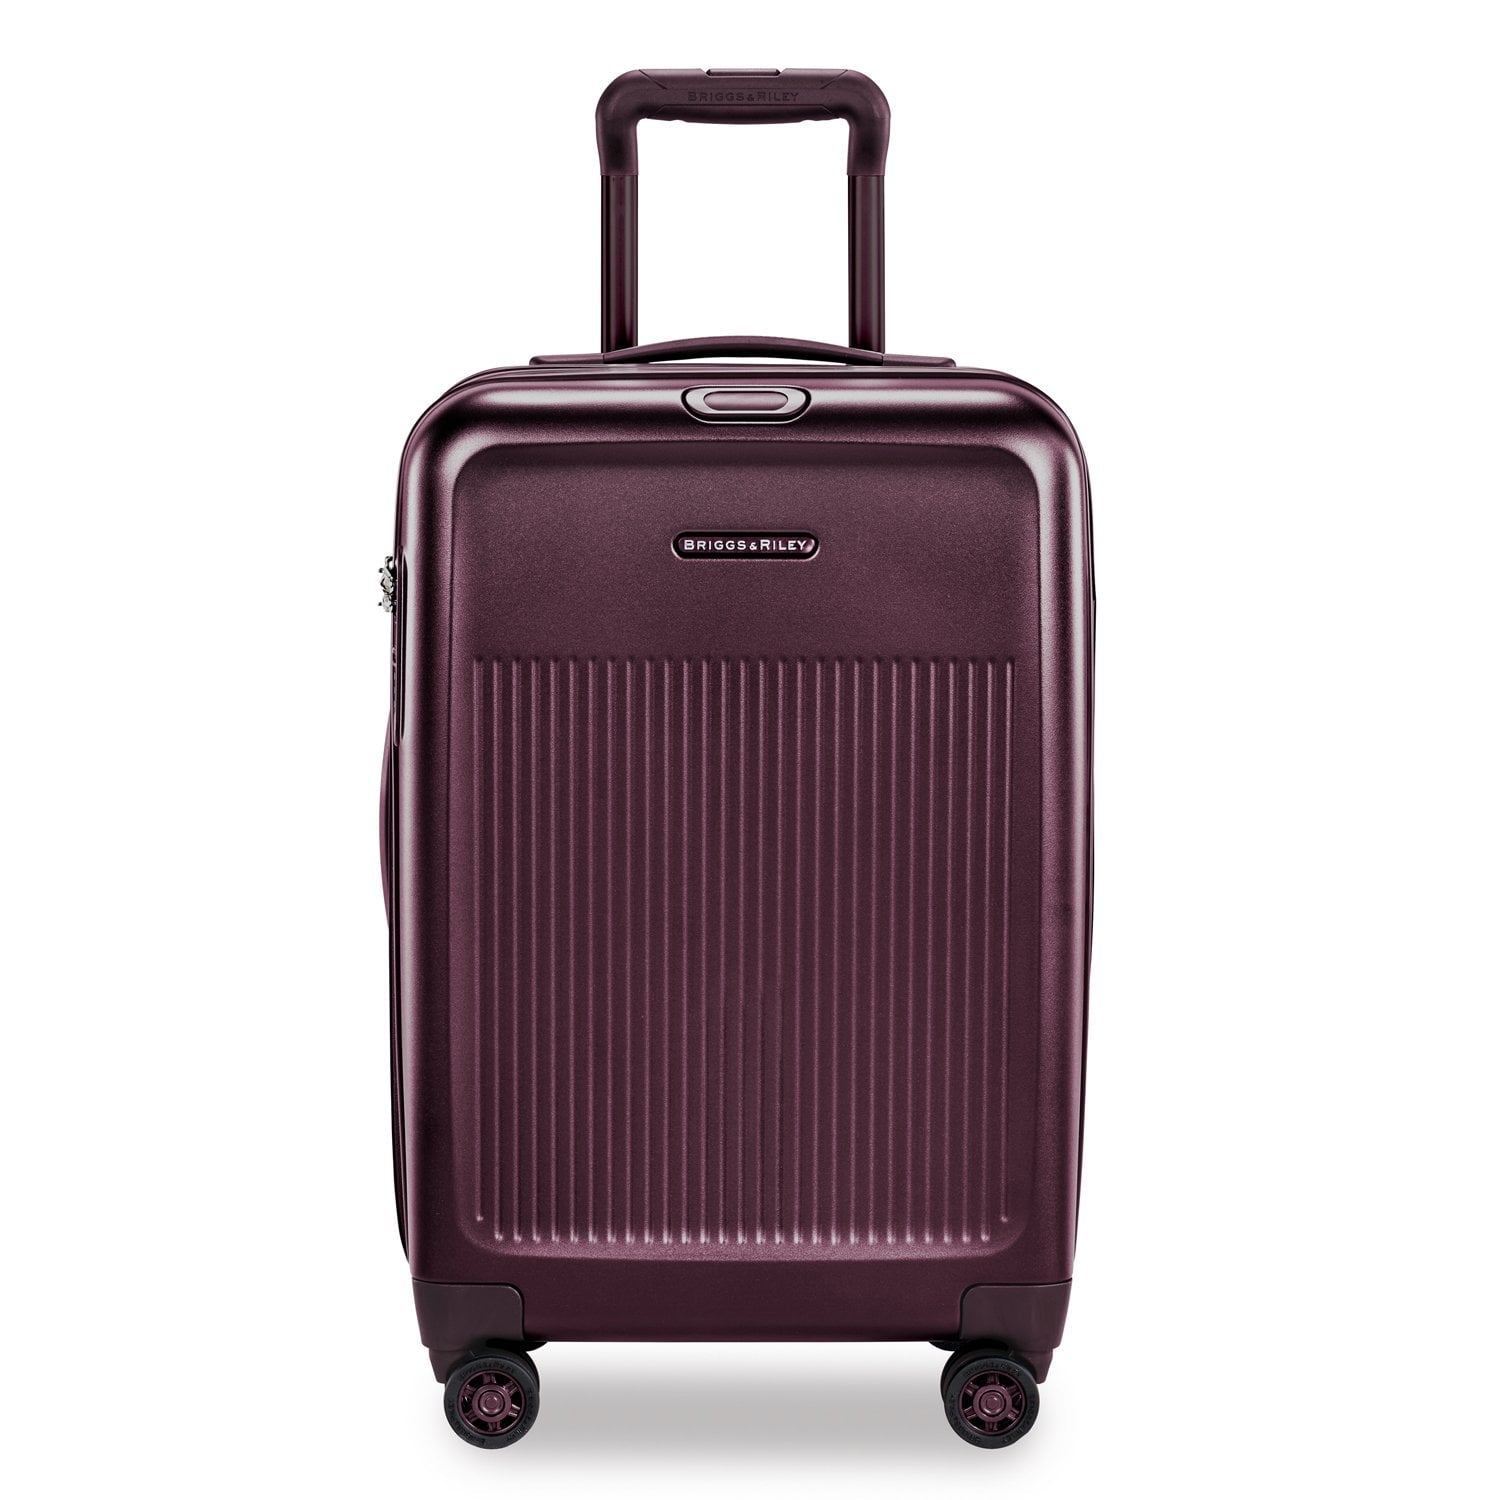 Briggs & Riley Sympatico Domestic Carry-On Expandable Spinner Luggage - Plum